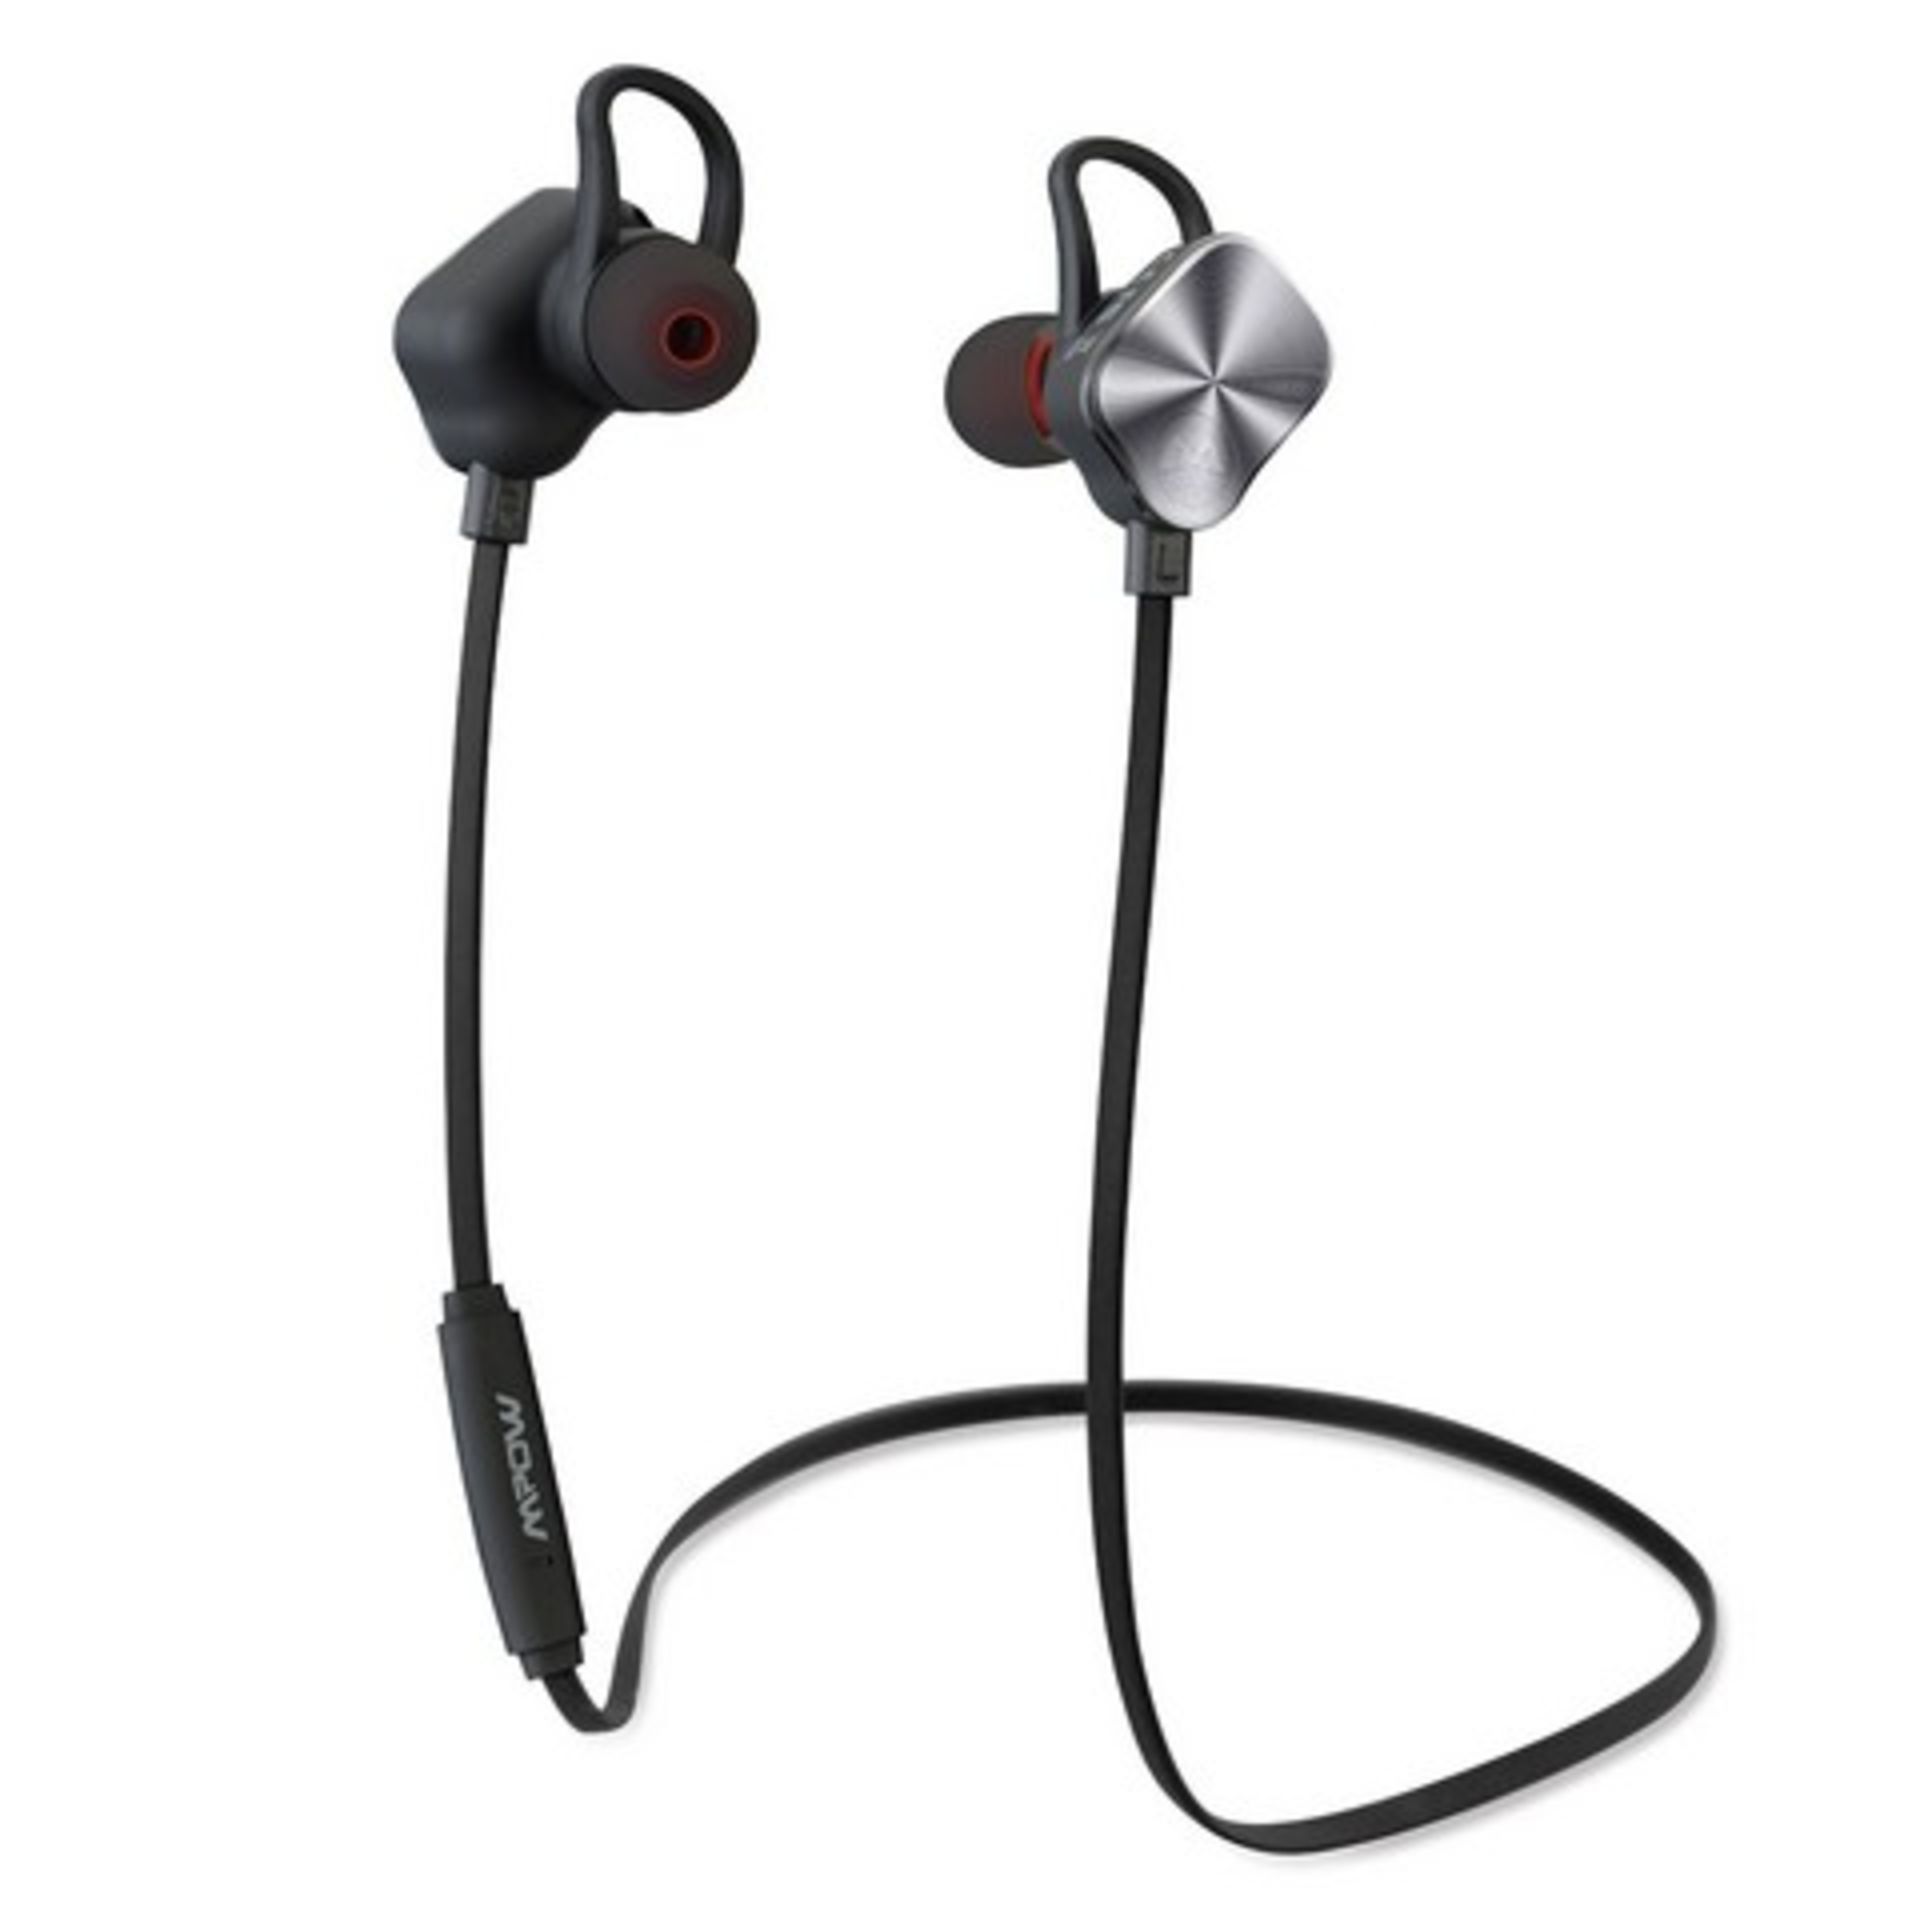 V Grade U Pair of Bluetooth Earphones/Headset (All Boxed) - Colours and Styles/Makes May Vary - Some - Image 6 of 7